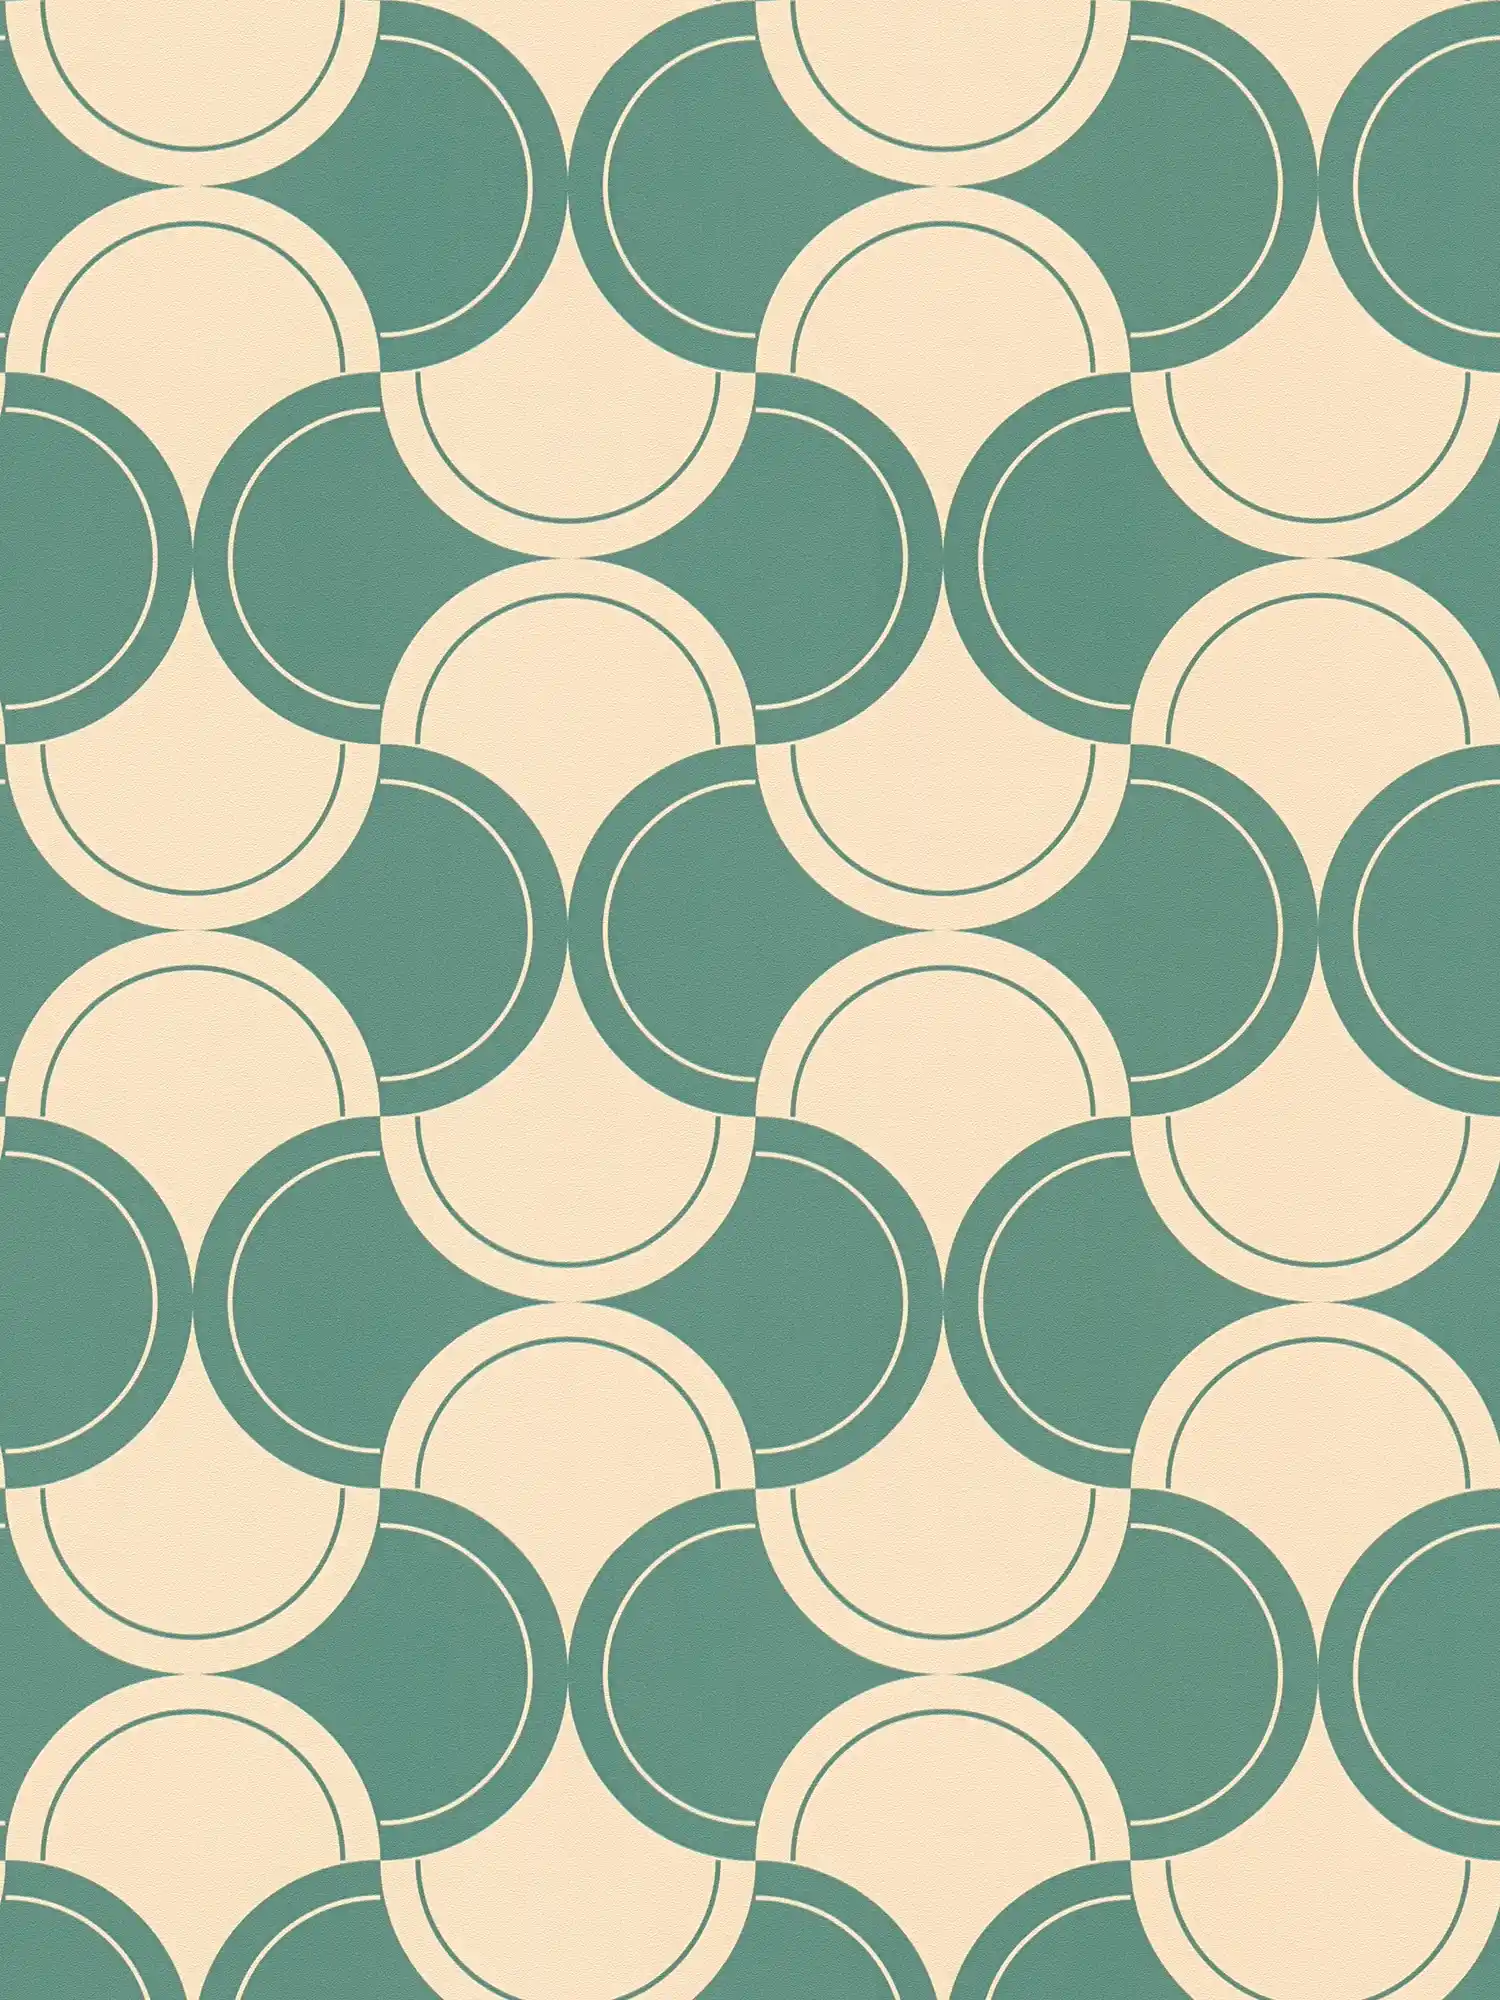         Non-woven wallpaper with semi-circle pattern in 70s style - green, beige
    